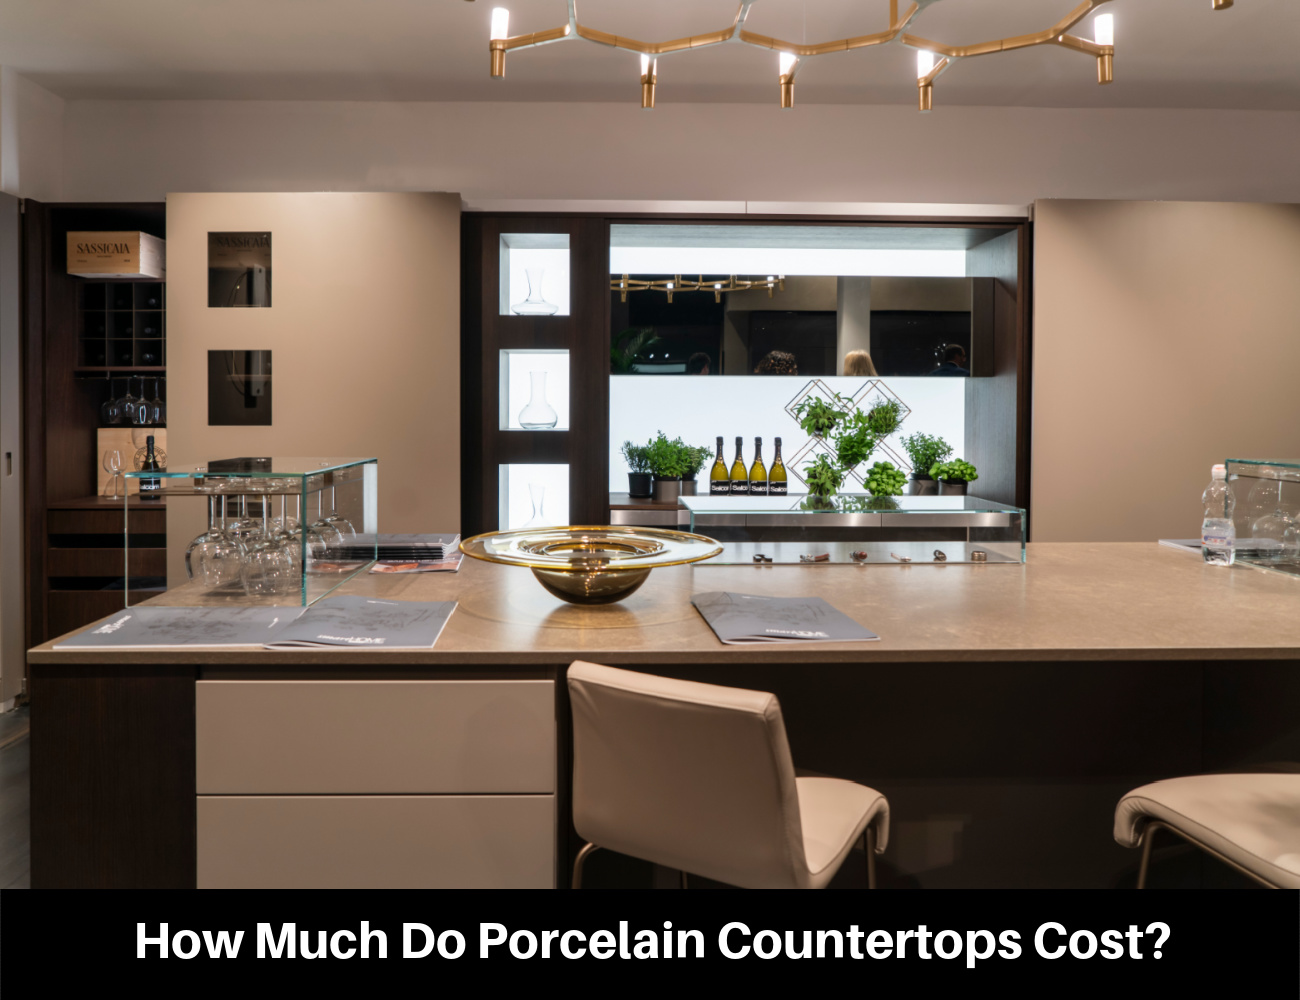 How Much Do Porcelain Countertops Cost?